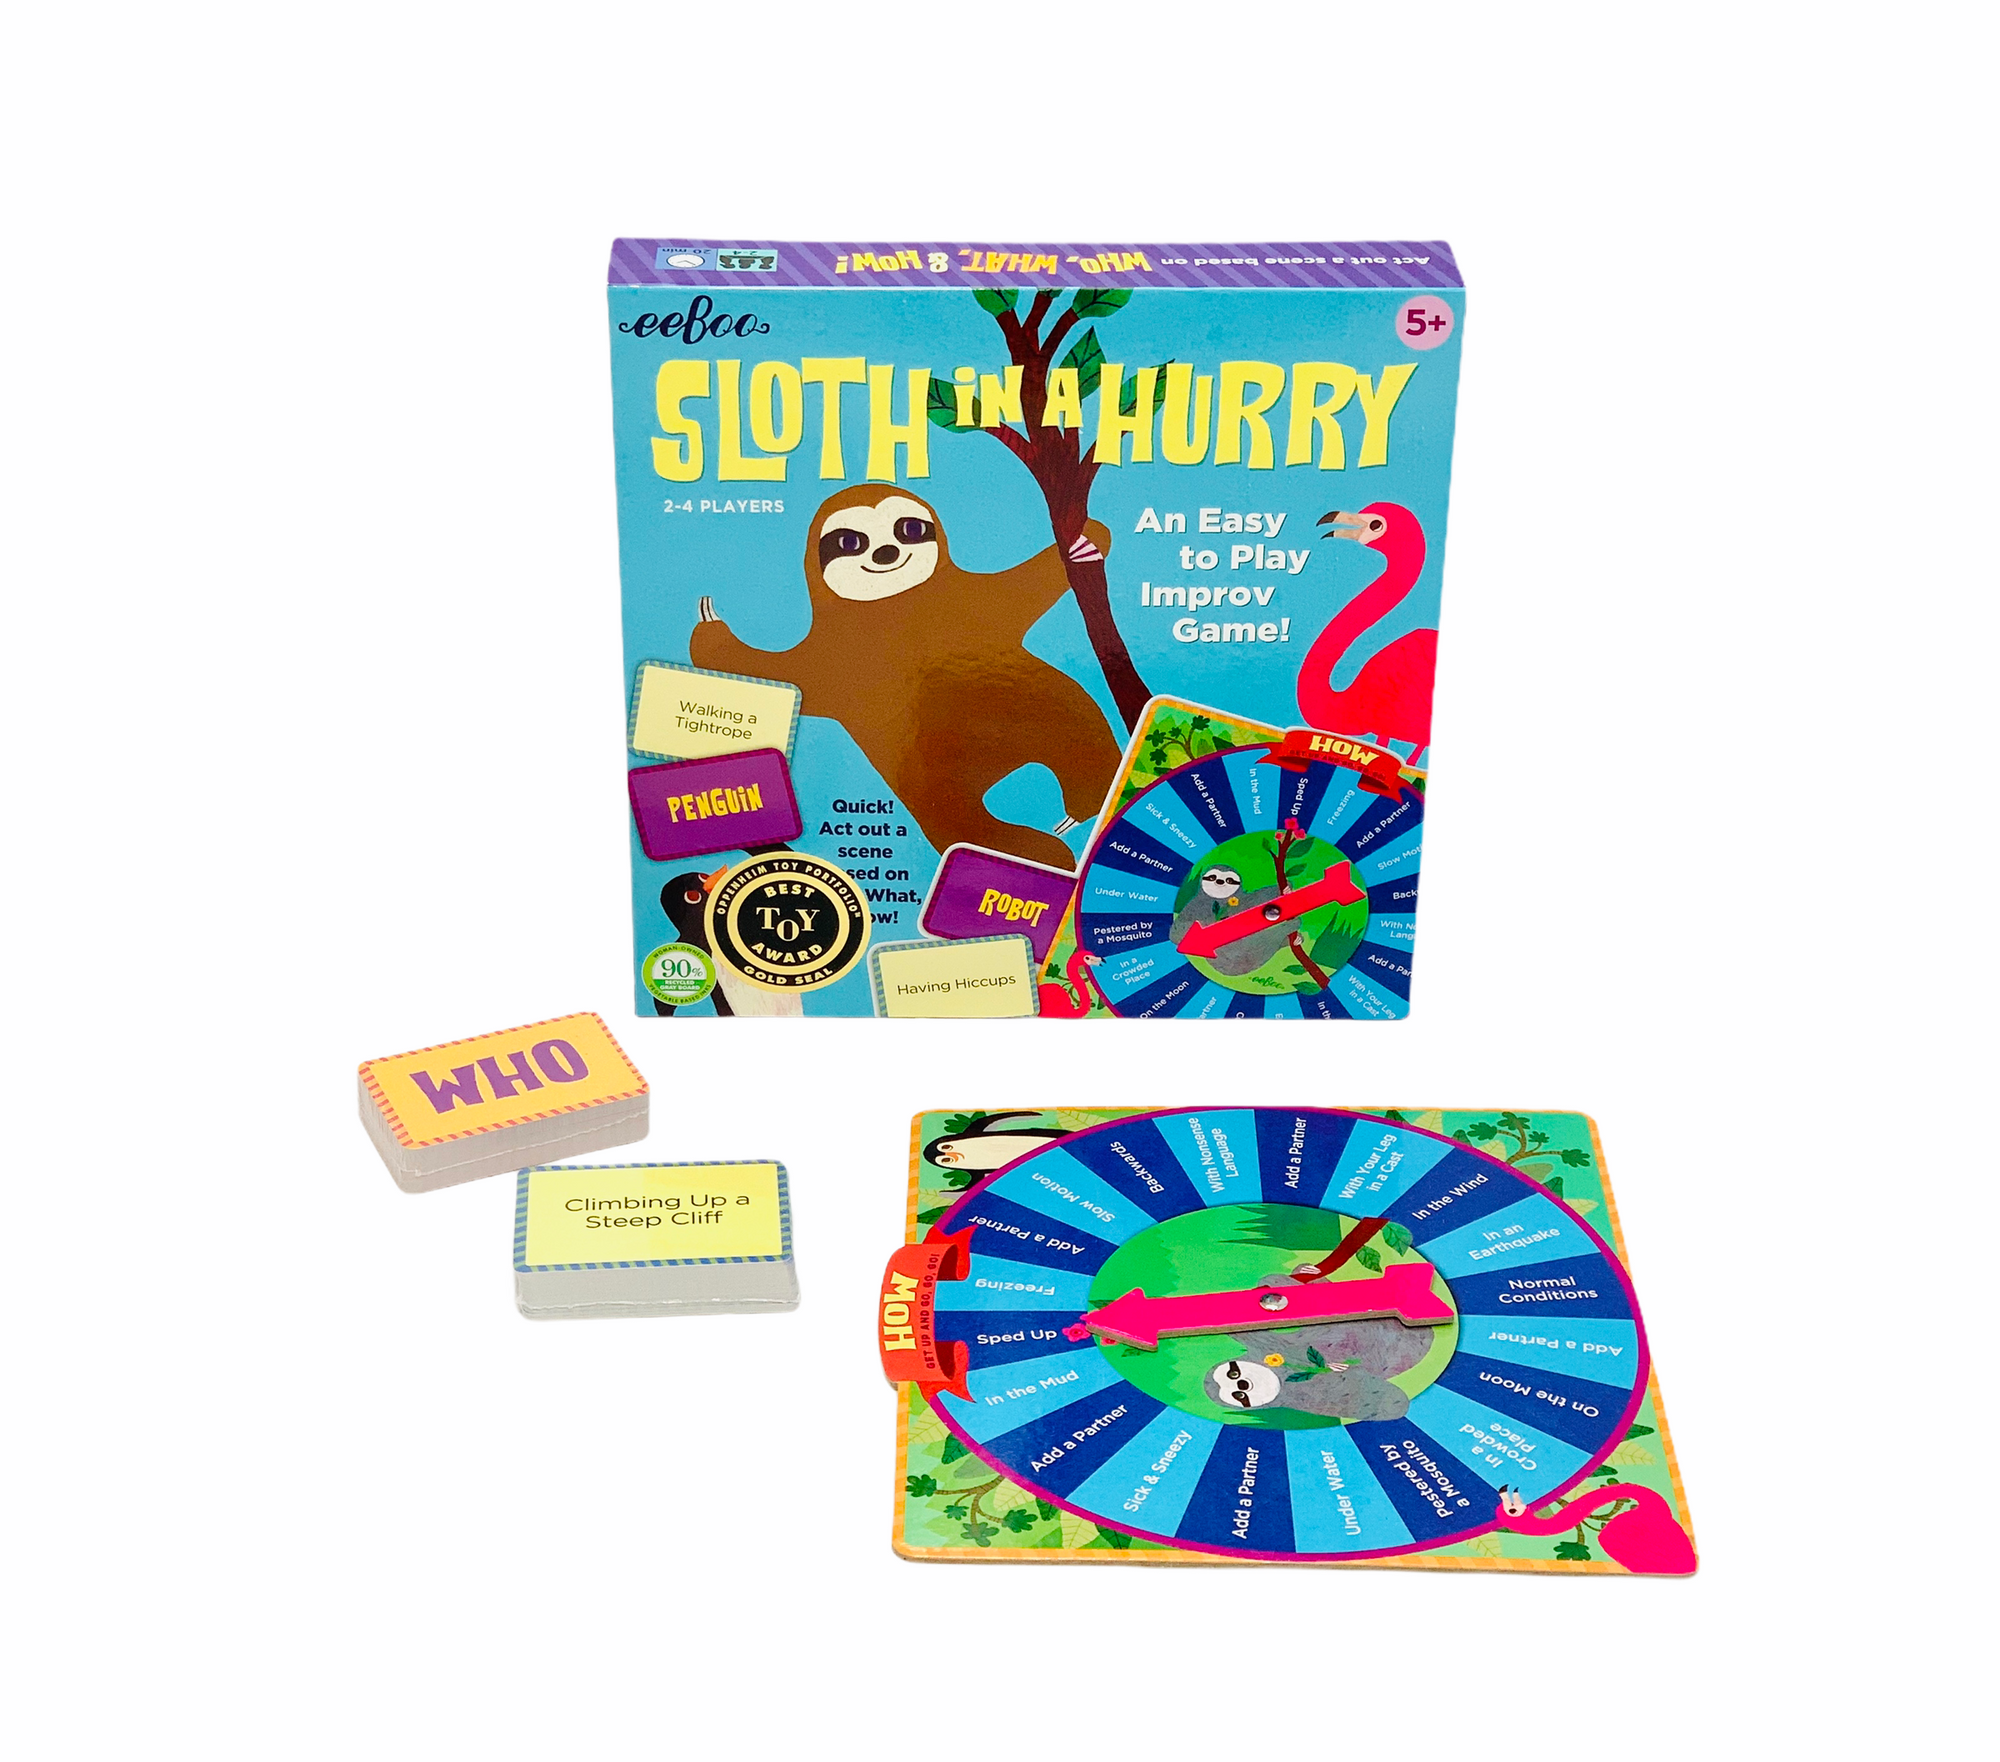 Eeboo Sloth in a Hurry game with game spinner and playing cards placed in front of packaging on white background